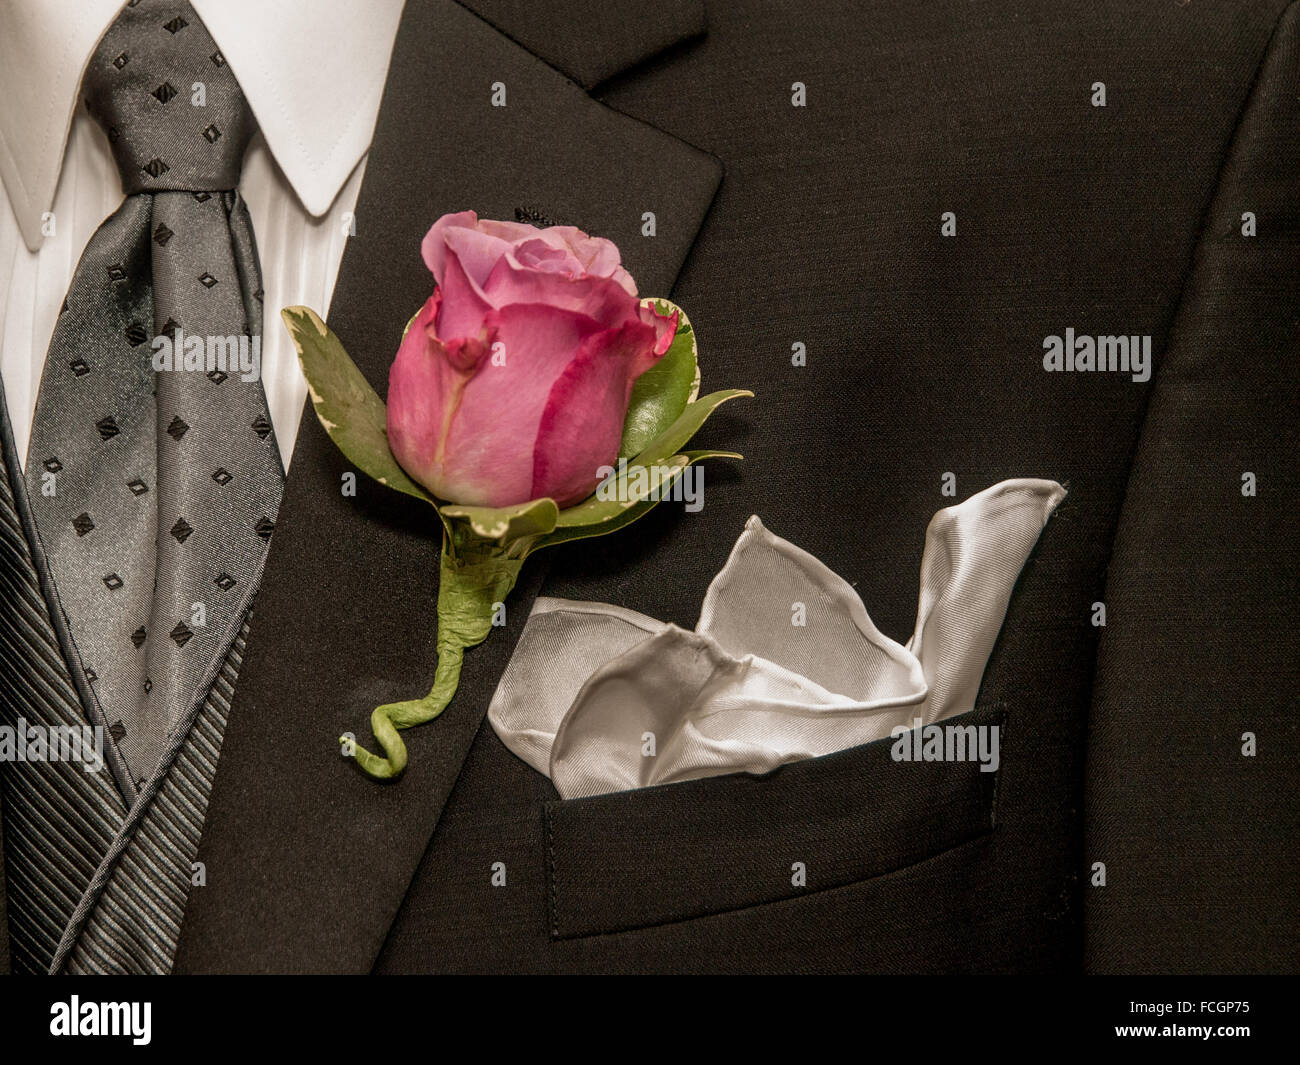 Pink and green rose on lapel of black suit jacket. Stock Photo